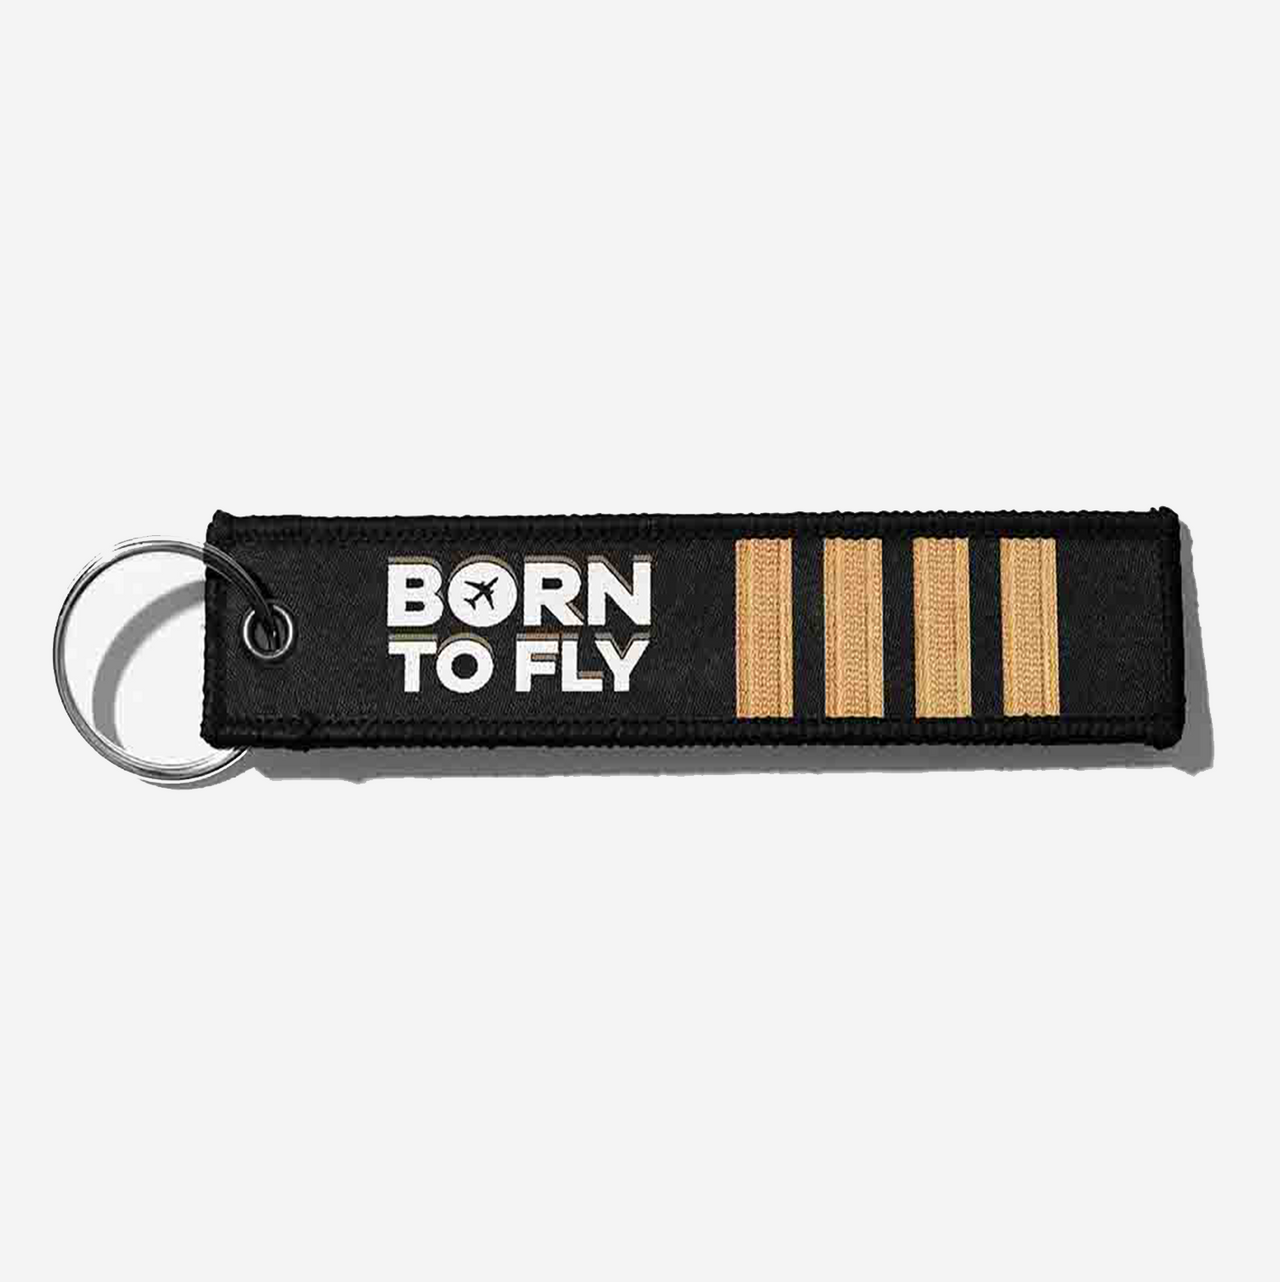 Born to Fly & Pilot Epaulettes (4 Lines) Designed Key Chains